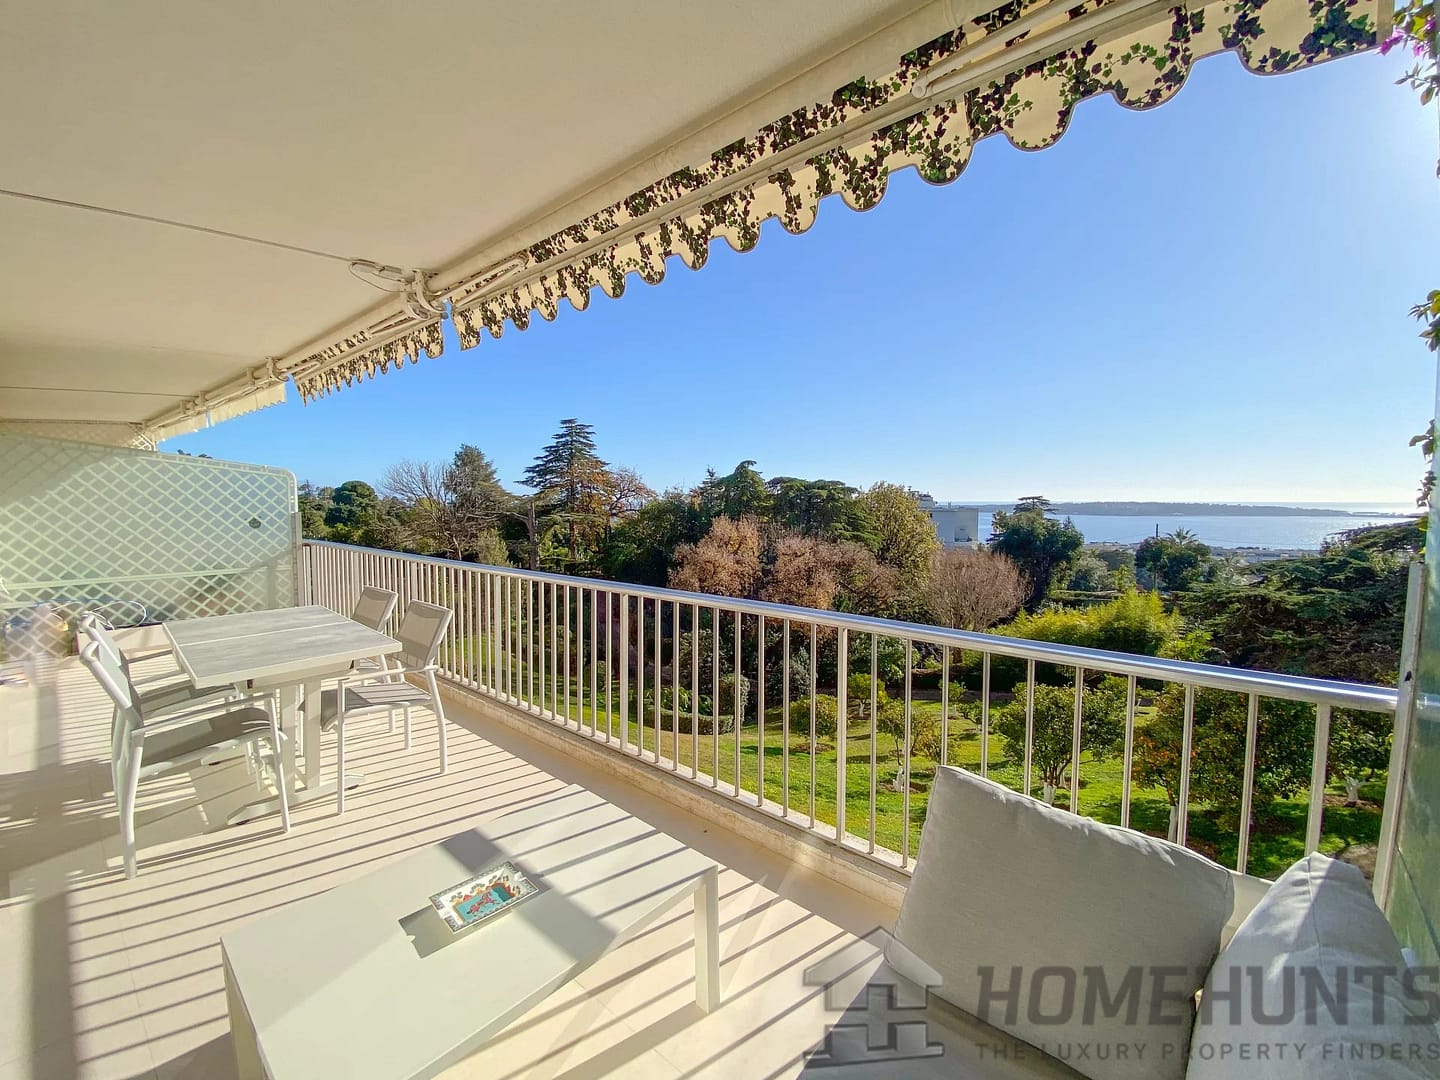 Apartment For Sale in Cannes 12